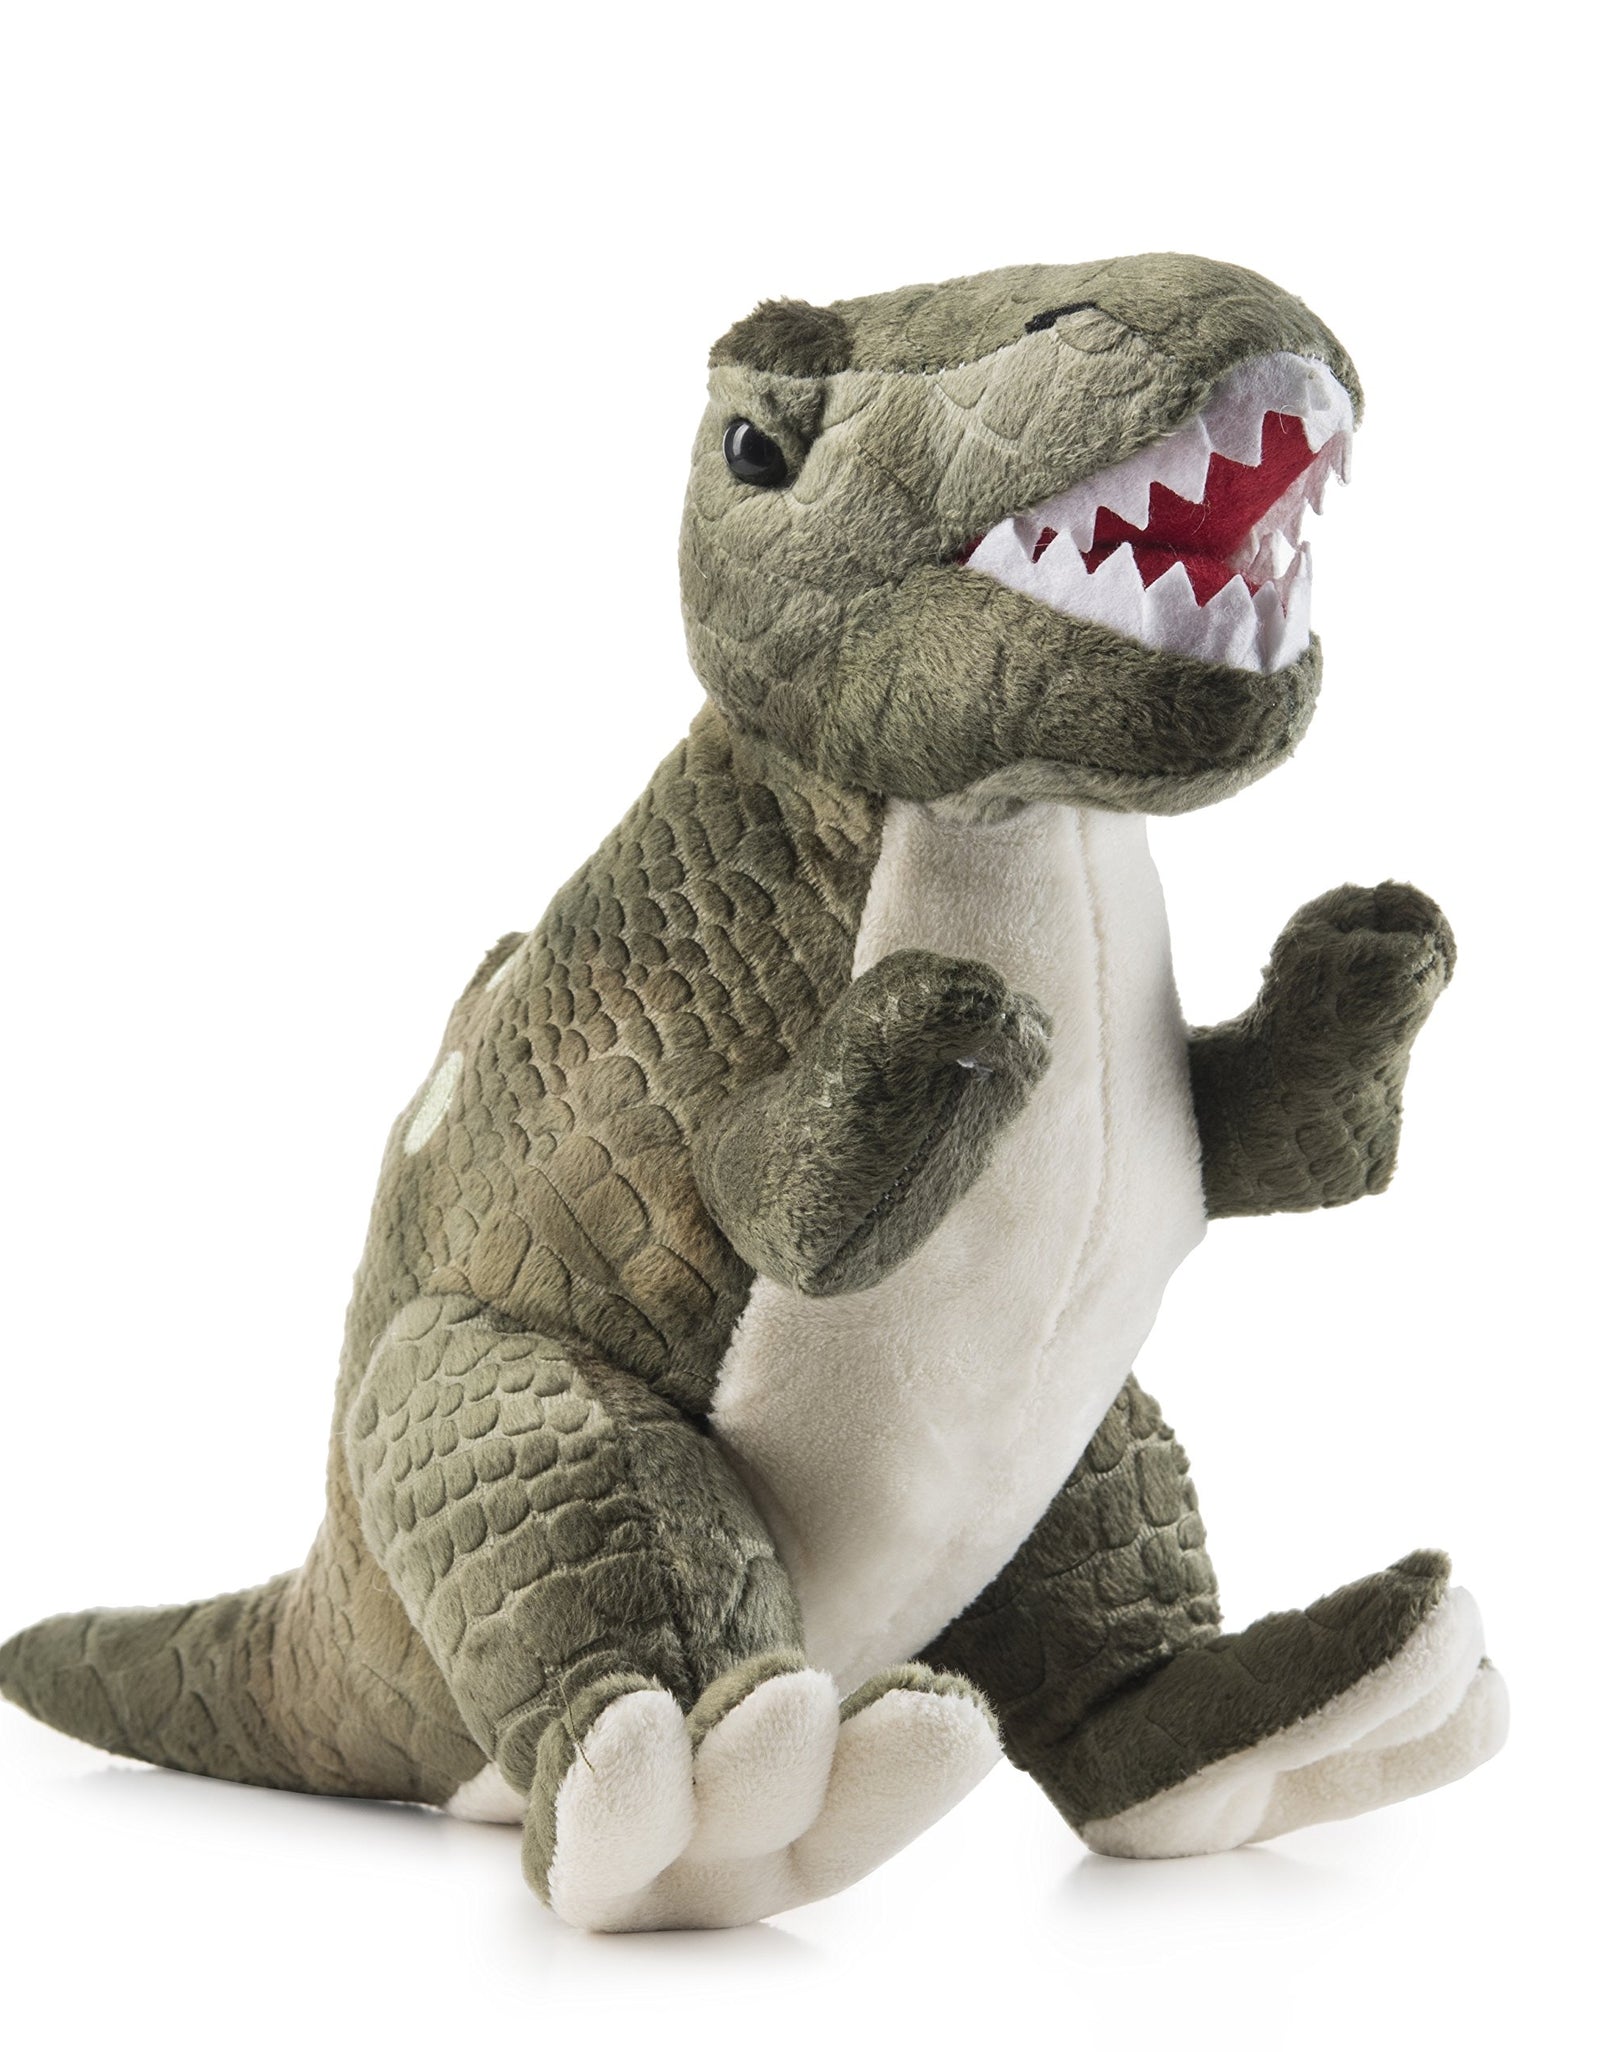 Prextex Plush Dinosaurs 4 Pack 10'' Long Great Gift for Kids Stuffed Animal Assortment Great Set for Kids